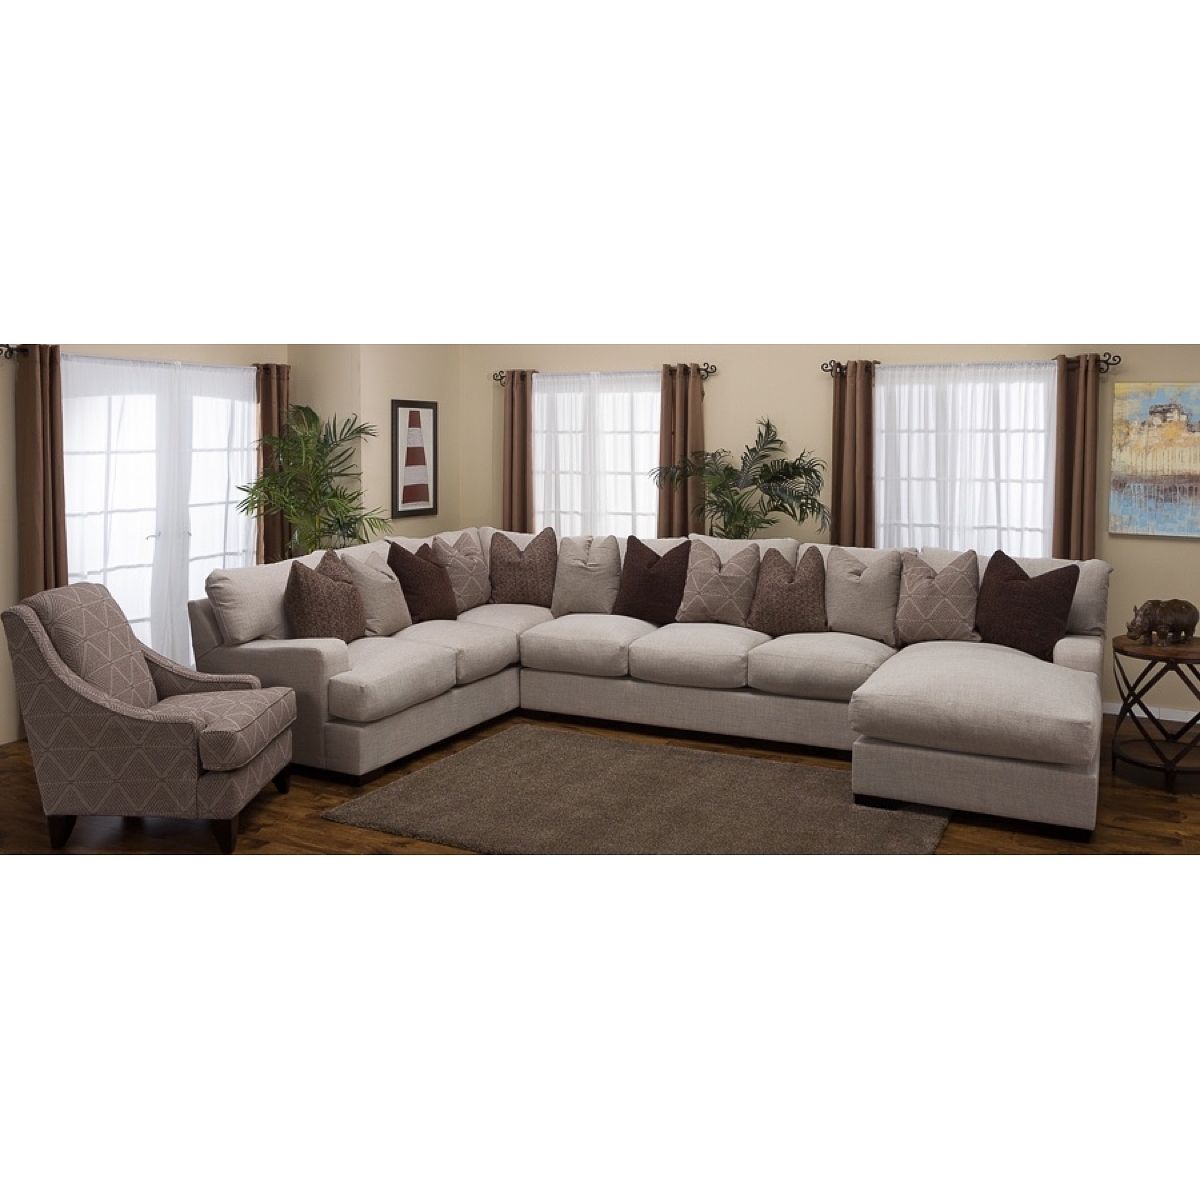 Eco Sectional Sofa – 28 Images – Eco Friendly Linen Couches Sofas Within Eco Friendly Sectional Sofas (View 4 of 10)